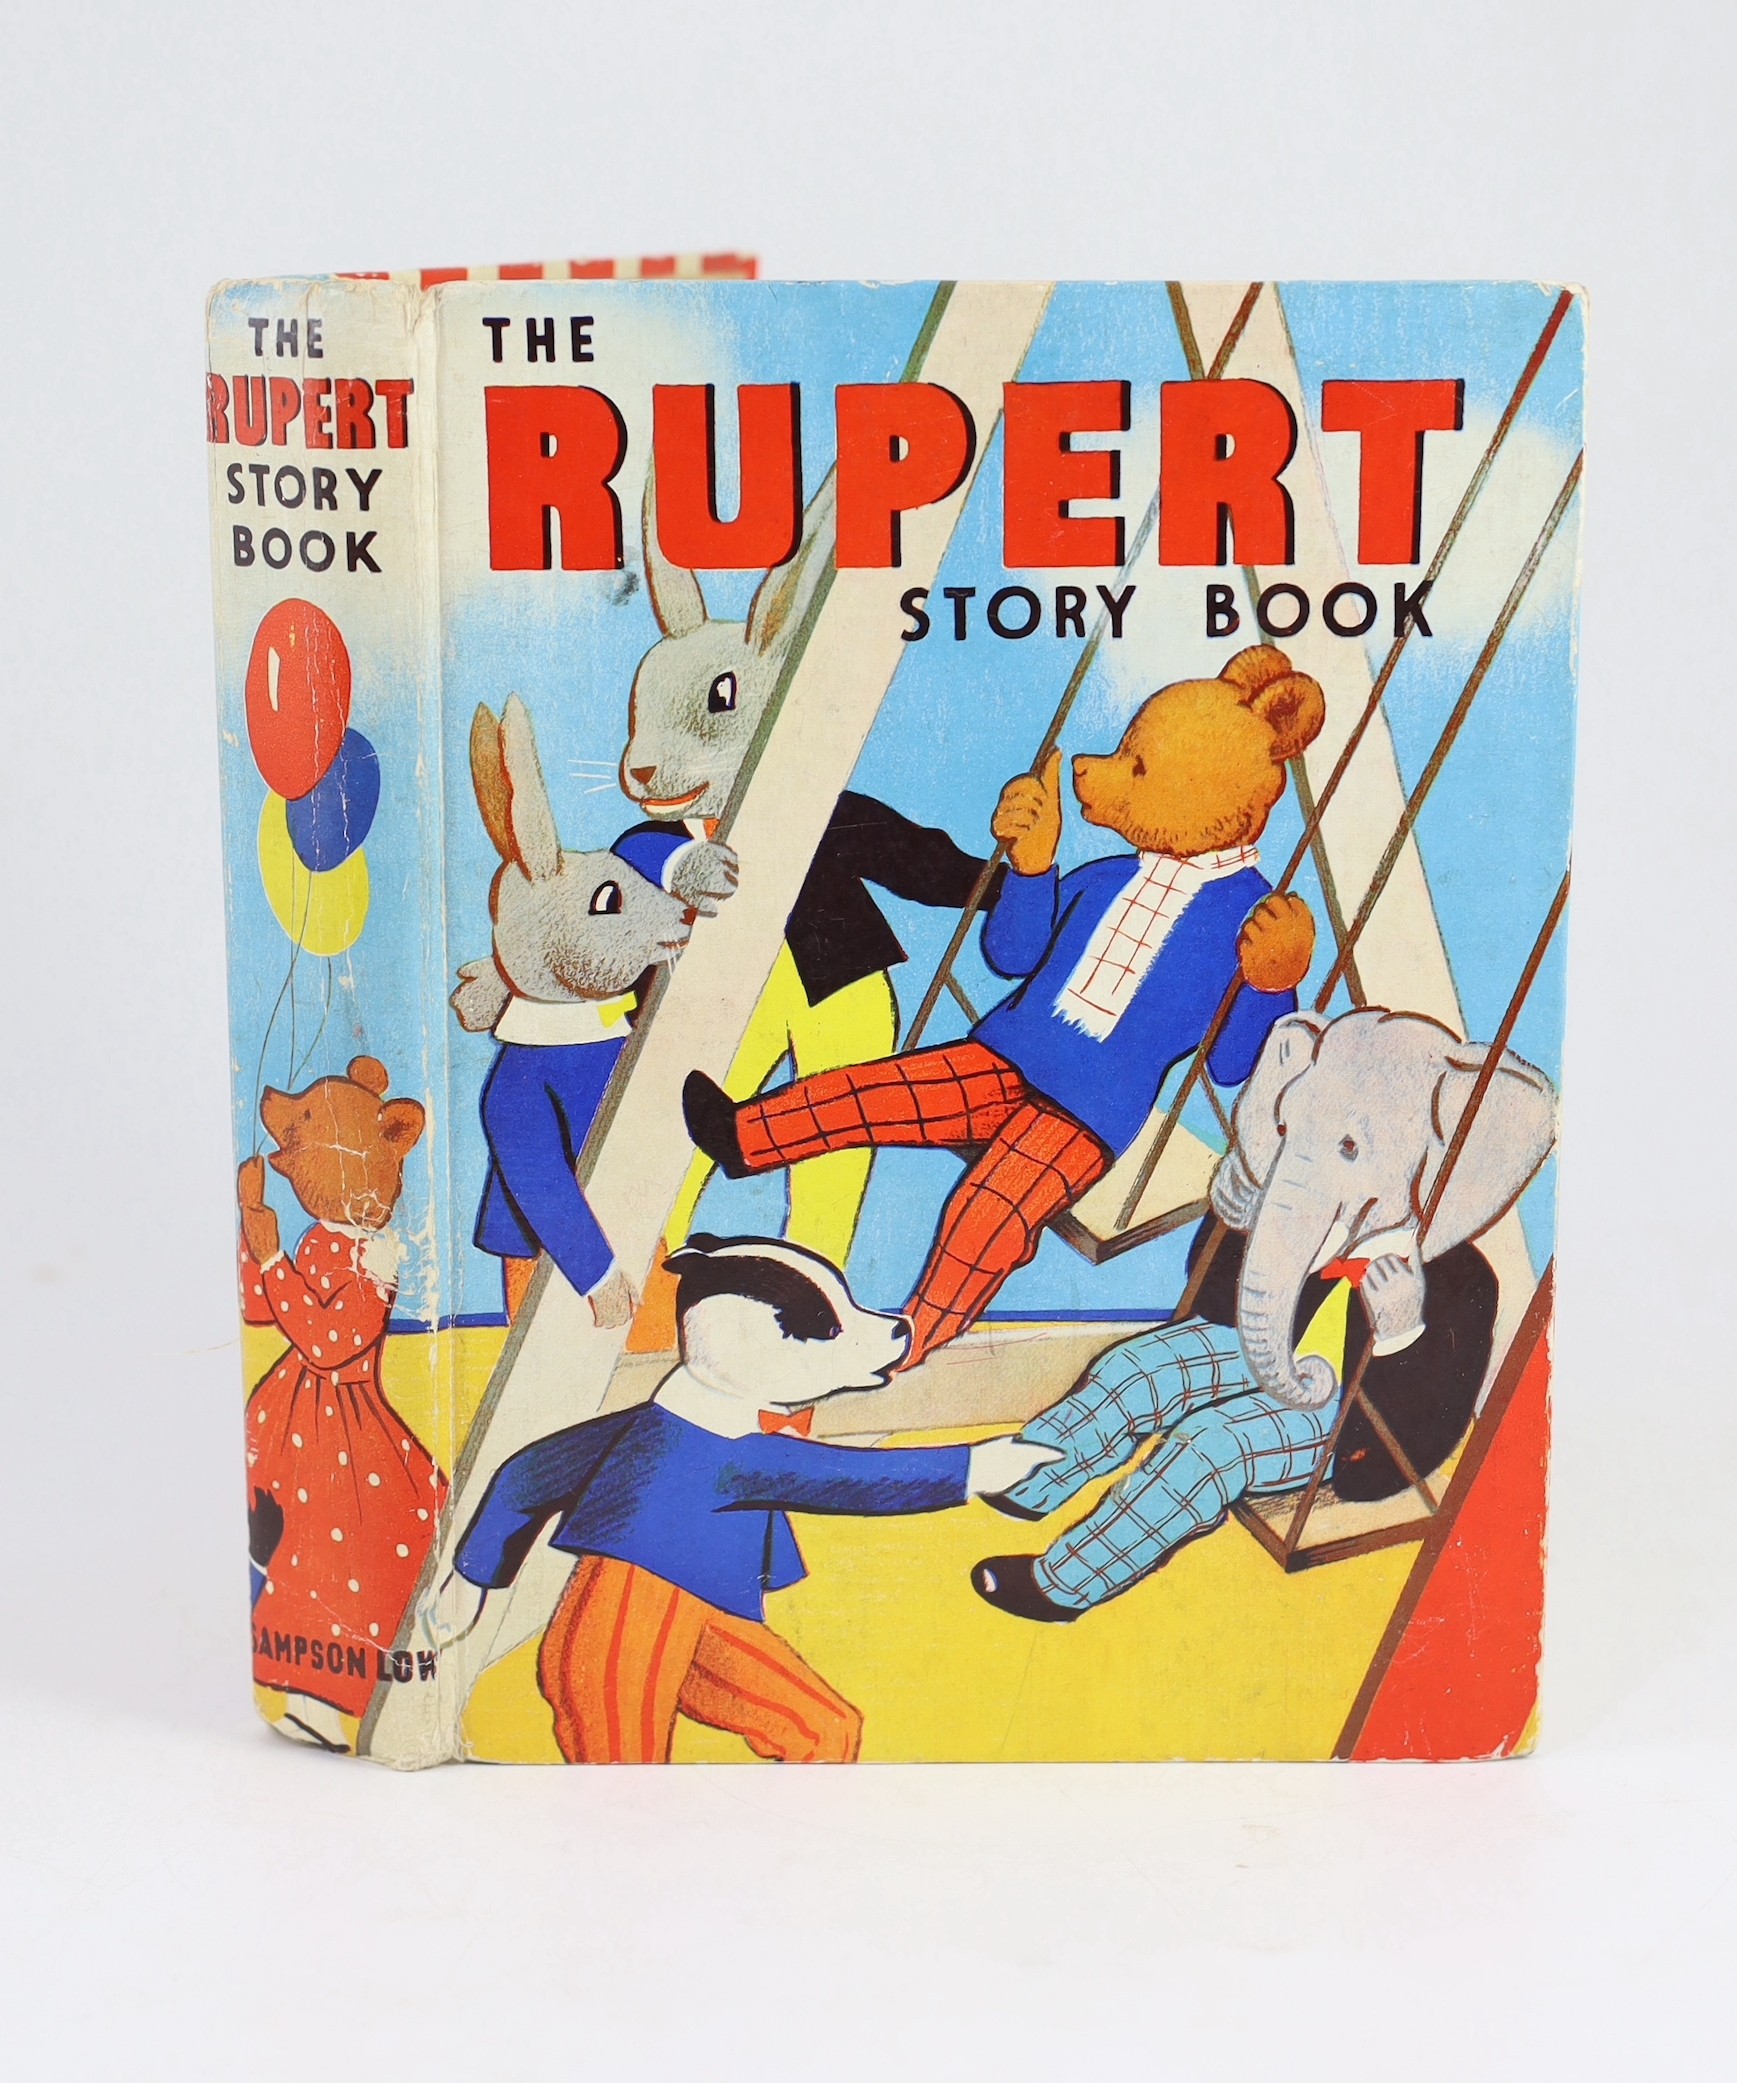 Tourtel, Mary - The Rupert Story Book, 1st edition, 4to, pictorial boards, ownership inscription neatly written in ‘’belongs to’’ box, Samson Low, Marston & Co., Ltd., London, 1938